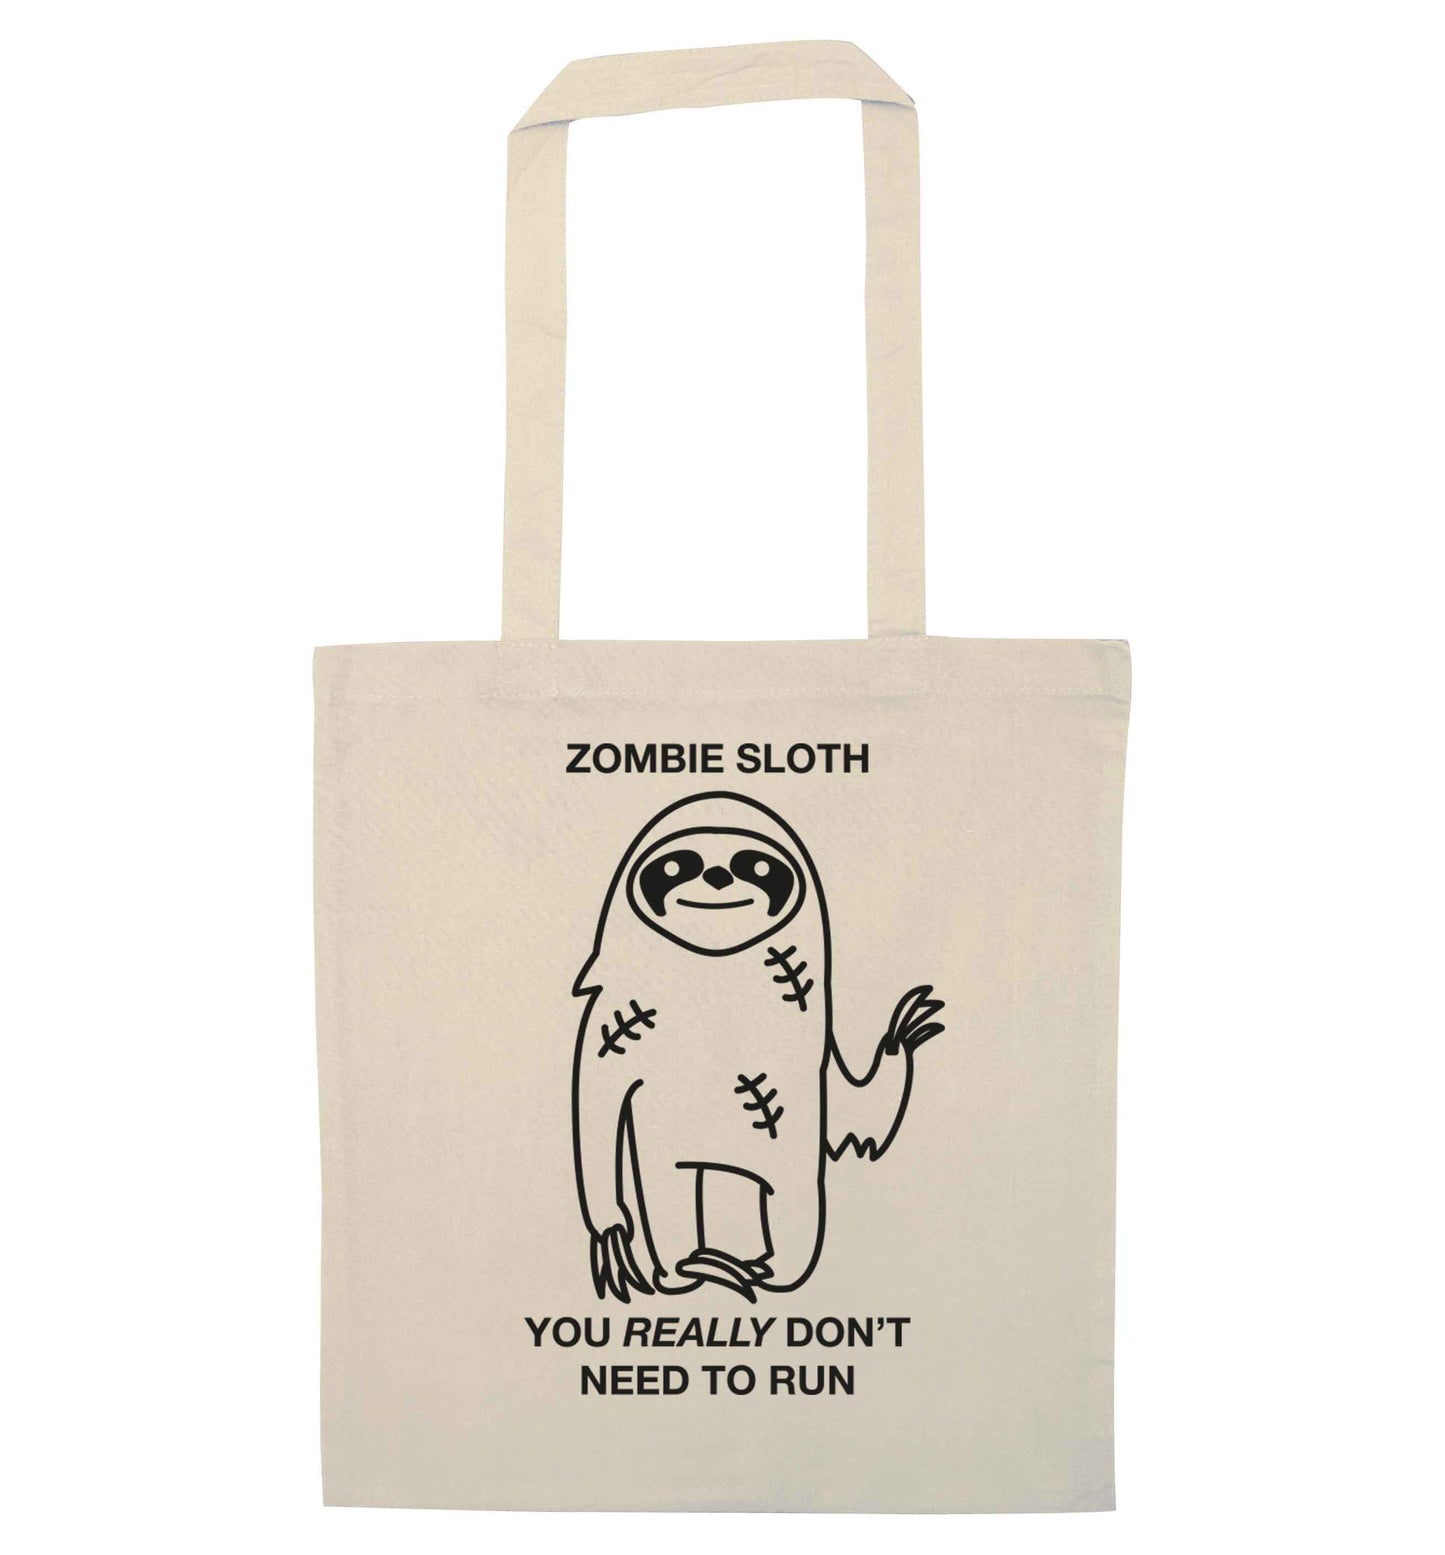 Zombie sloth you really don't need to run natural tote bag